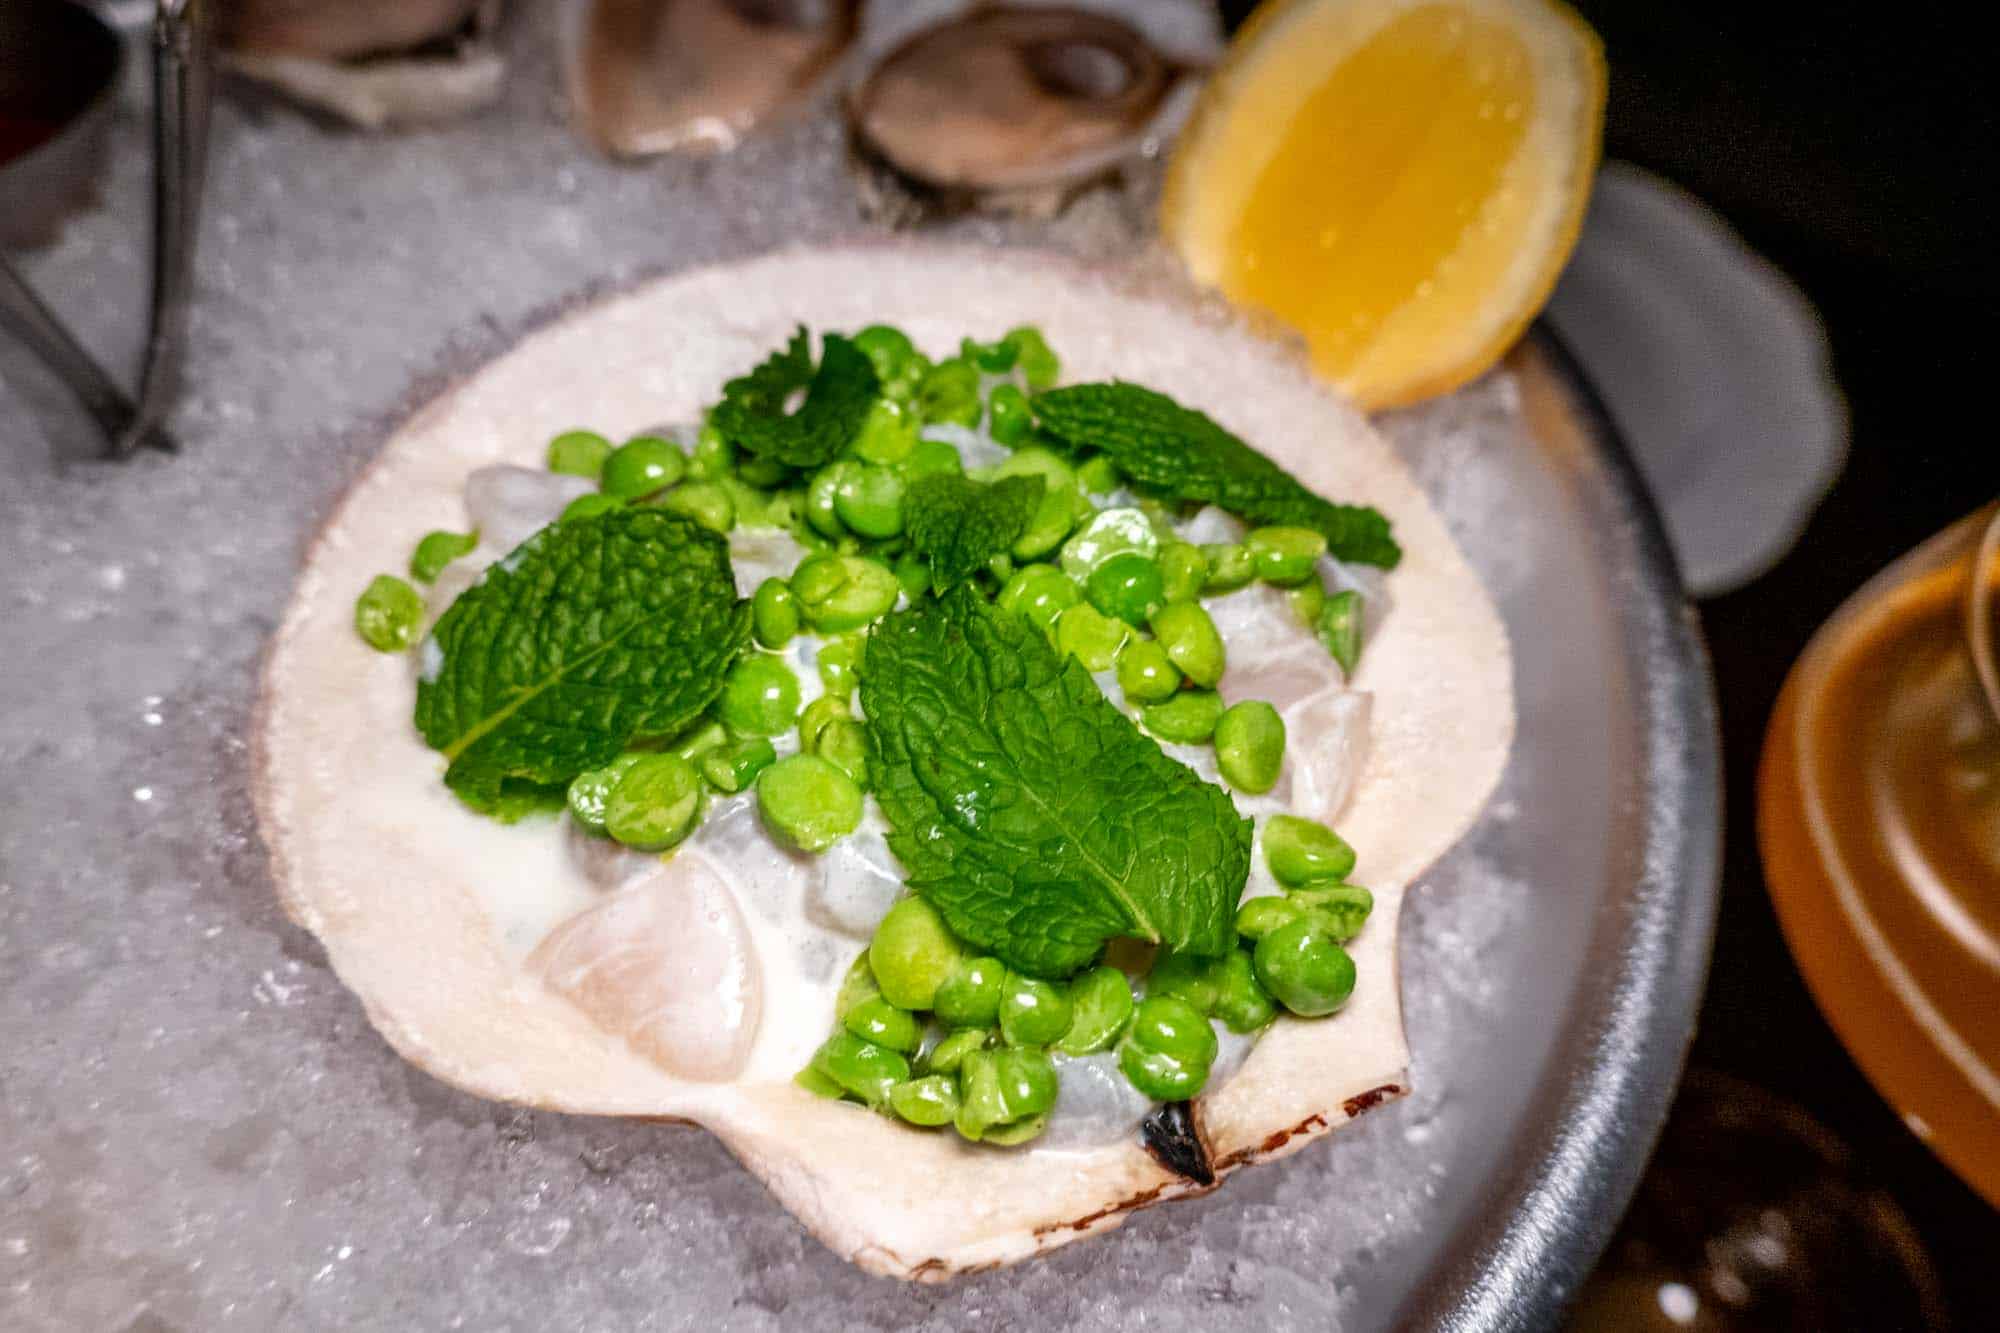 Scallops, peas, and mint served on a scallop shell on ice.